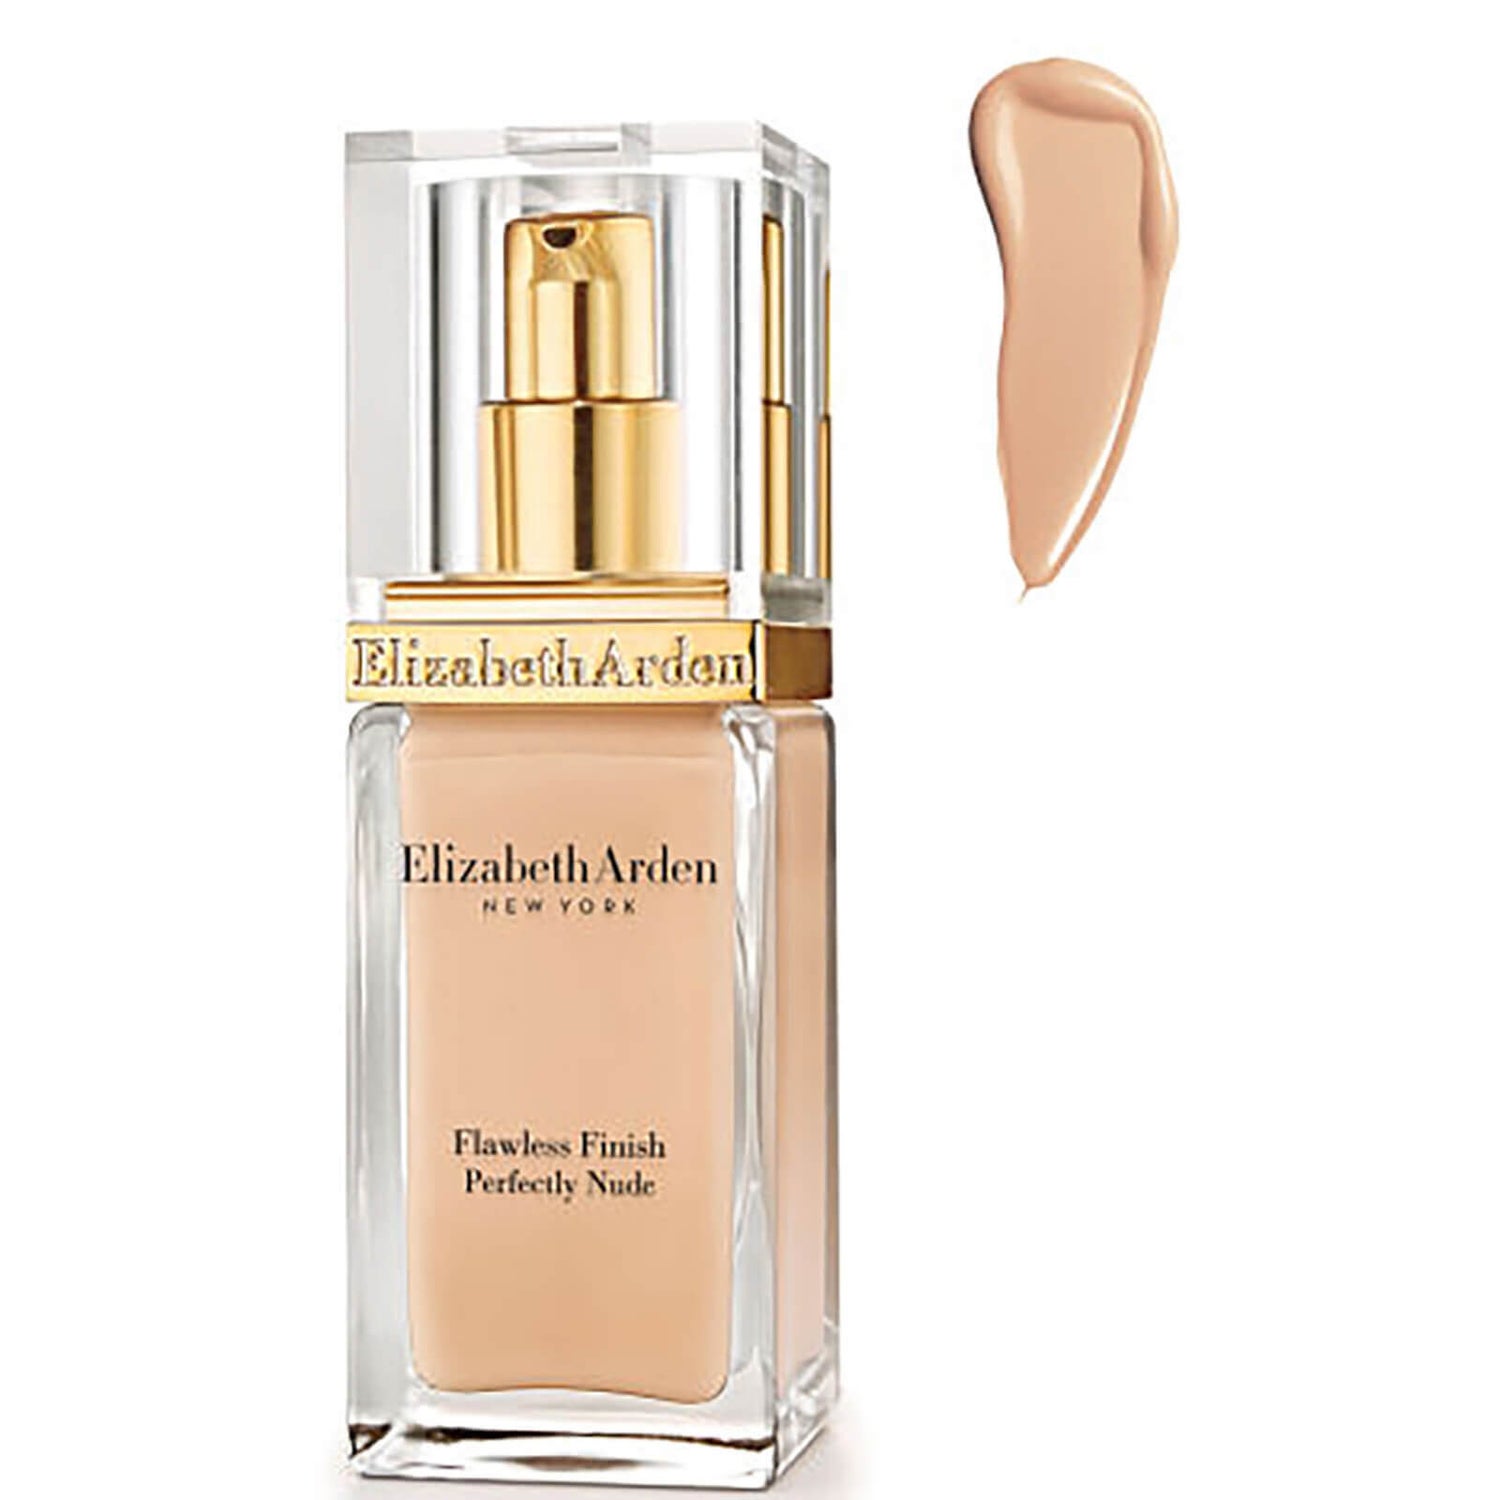 Elizabeth Arden Flawless Finish Perfectly Nude Makeup (エリザベス アーデン フローレス フィニッシュ パーフェクトリー ヌード メイクアップ)